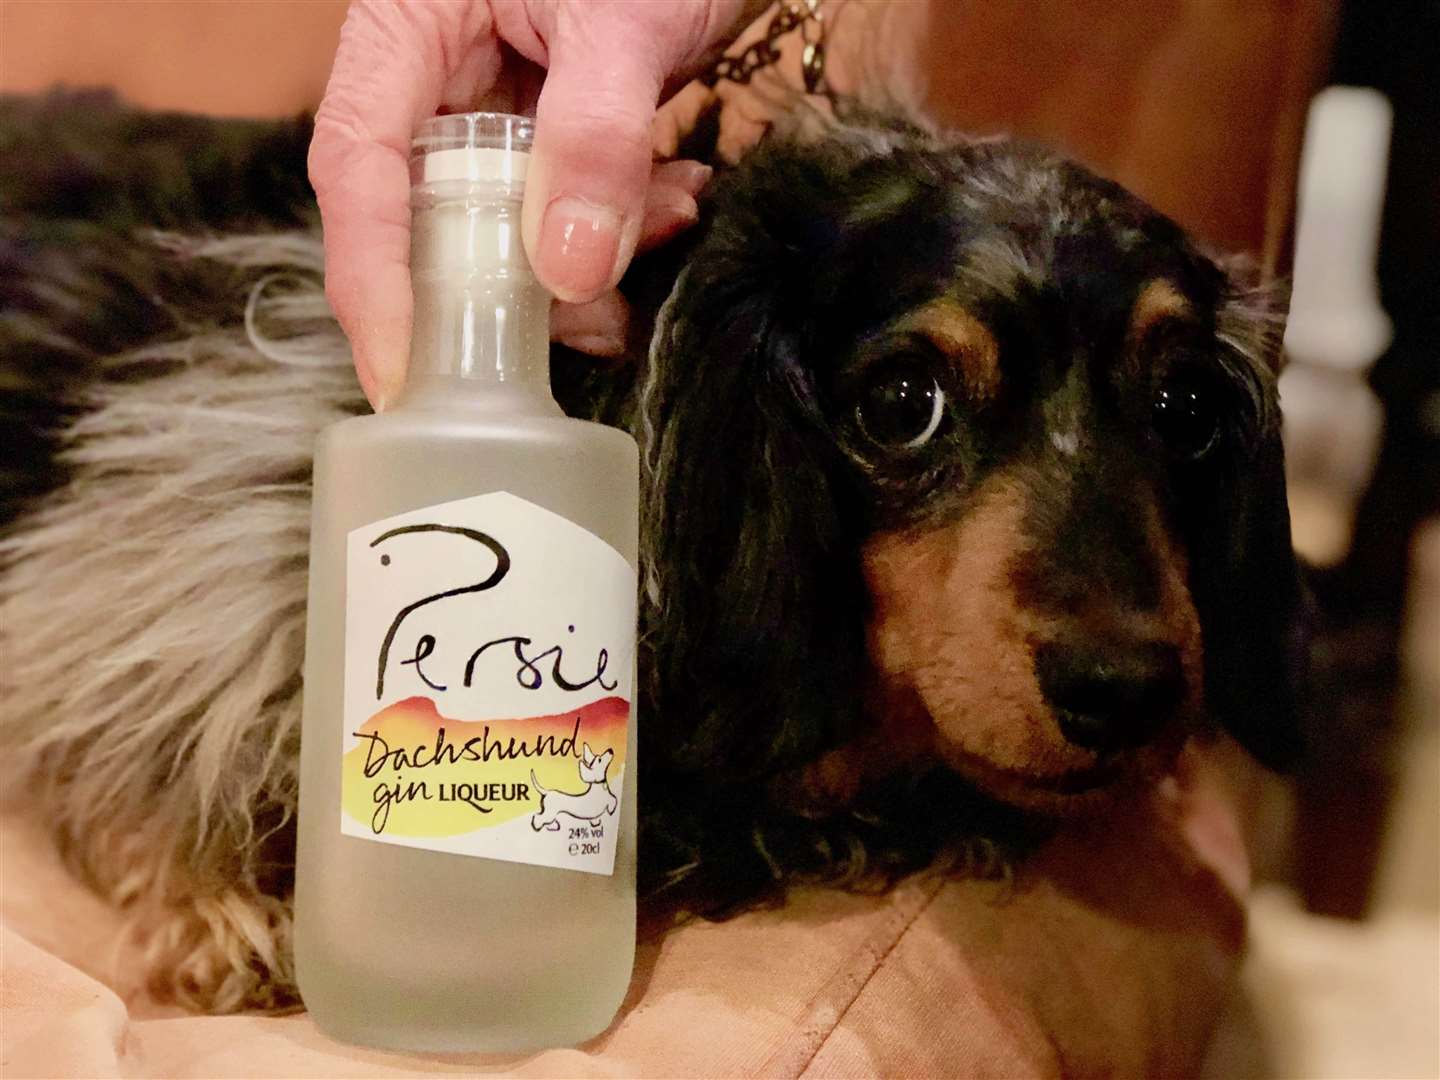 Persie’s Dachshund Gin Liqueur, the latest in the family of ‘dog gins’ from Glenshee.